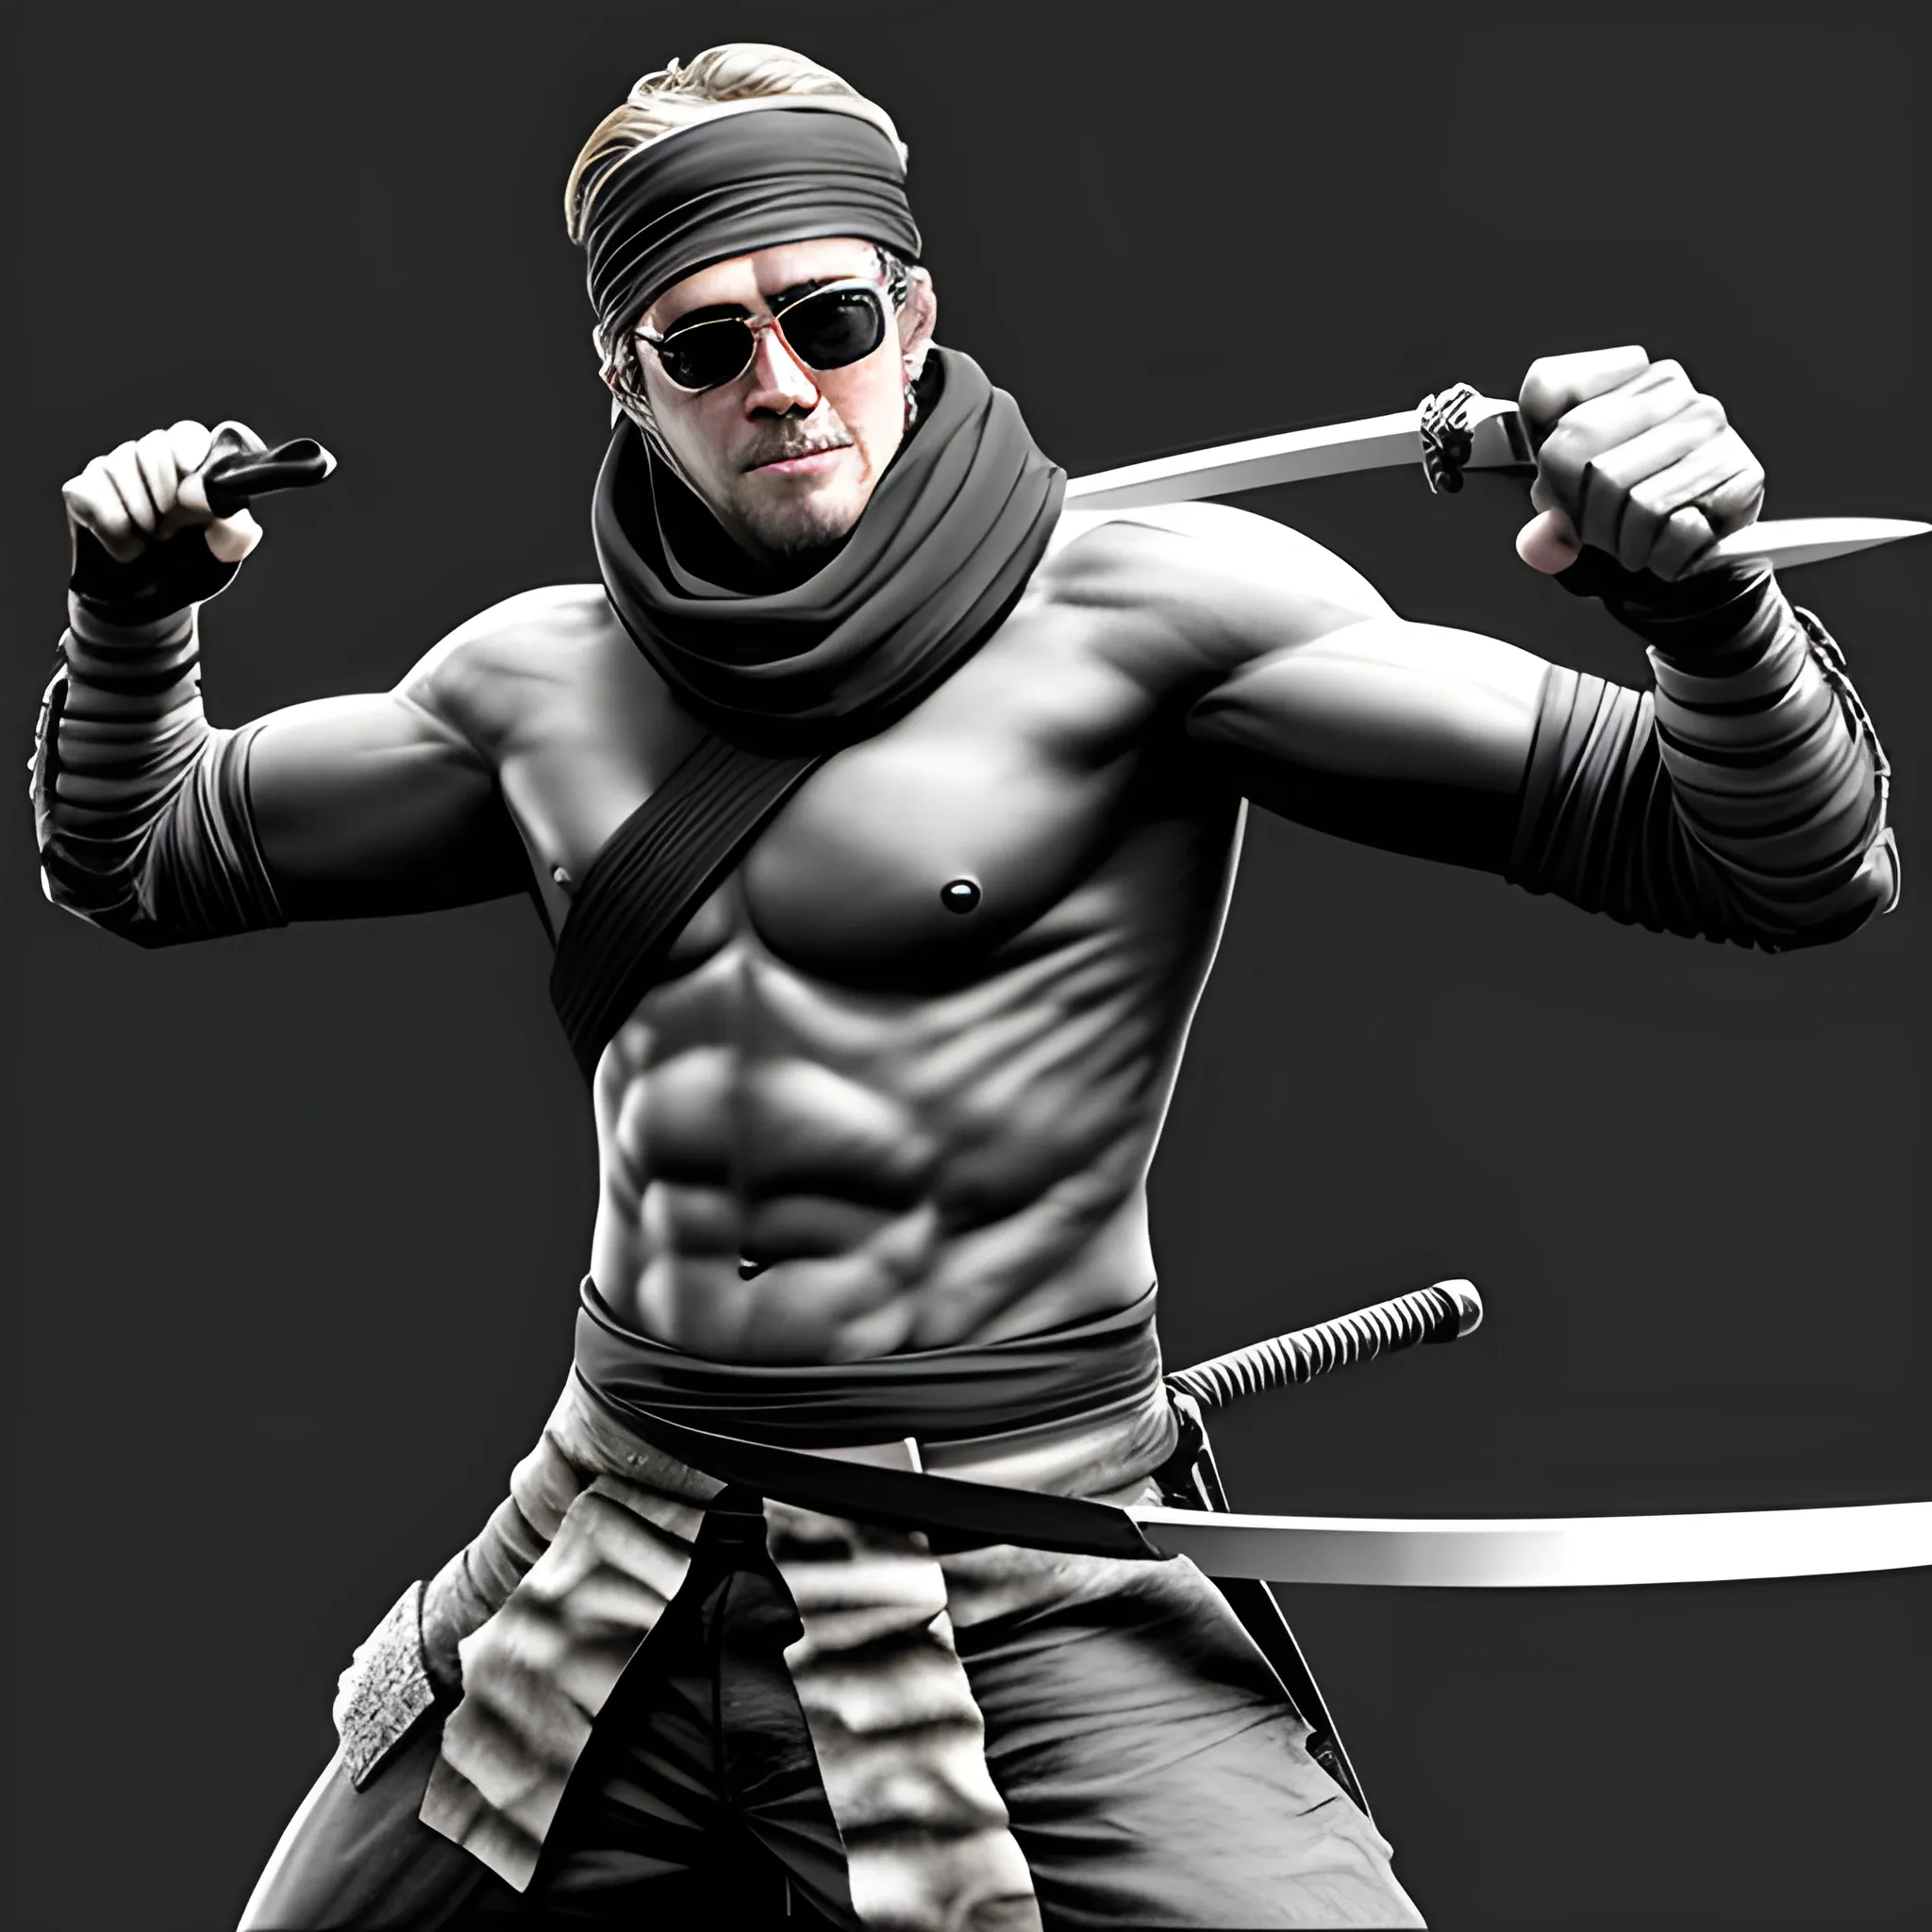 Madness Combat Sanford wielding a katana while showing his abs also wearing a sunglasses and a black bandana covering his head, Pencil Sketch, 3D